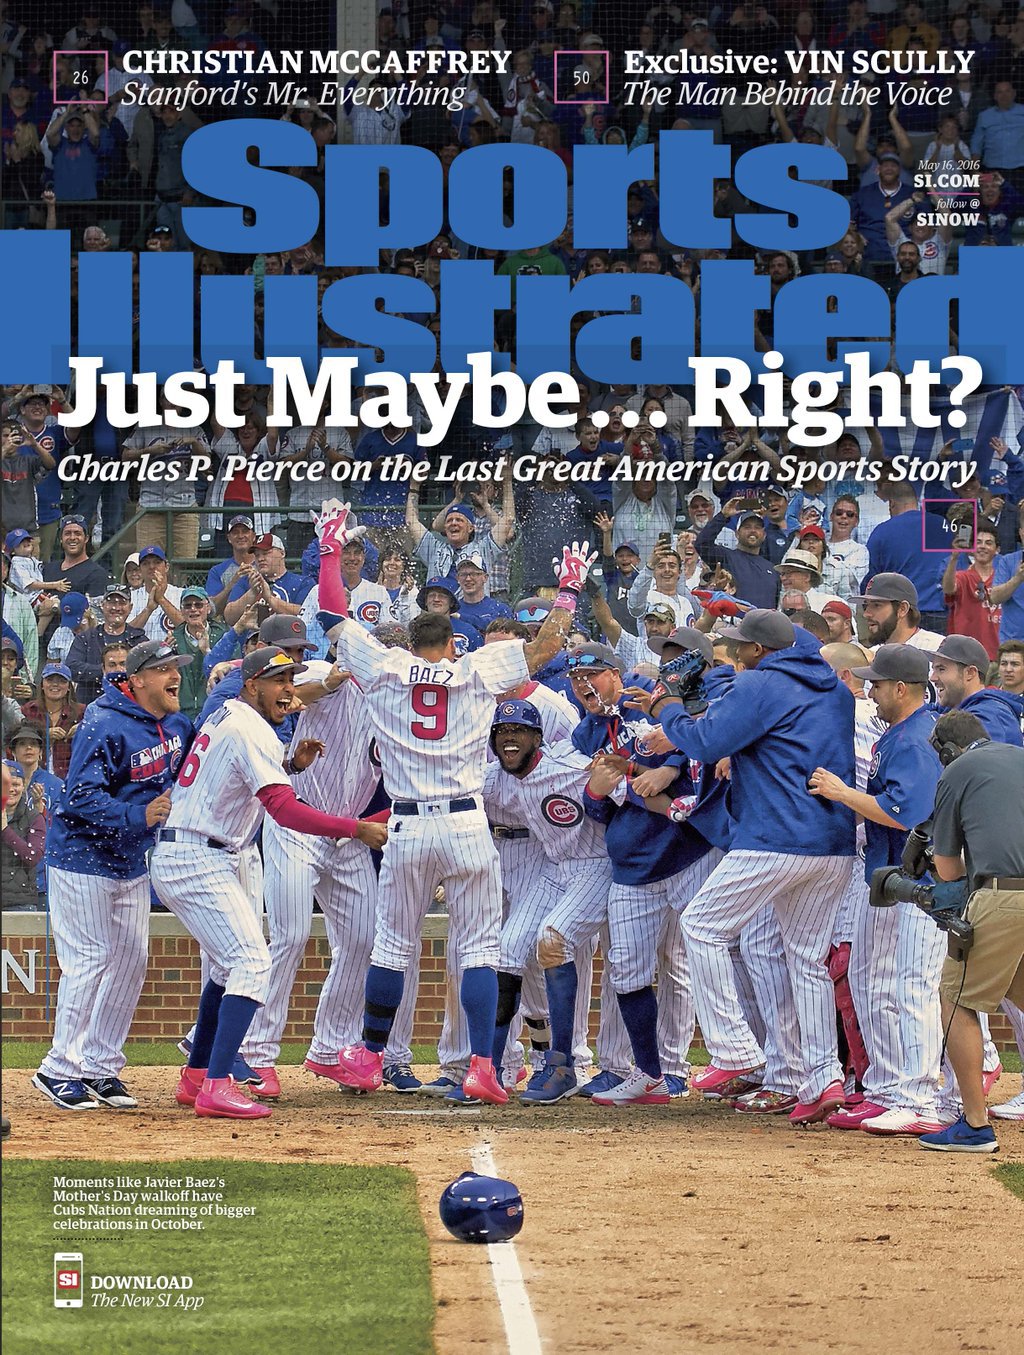 Cubs on the new cover of Sports Illustrated